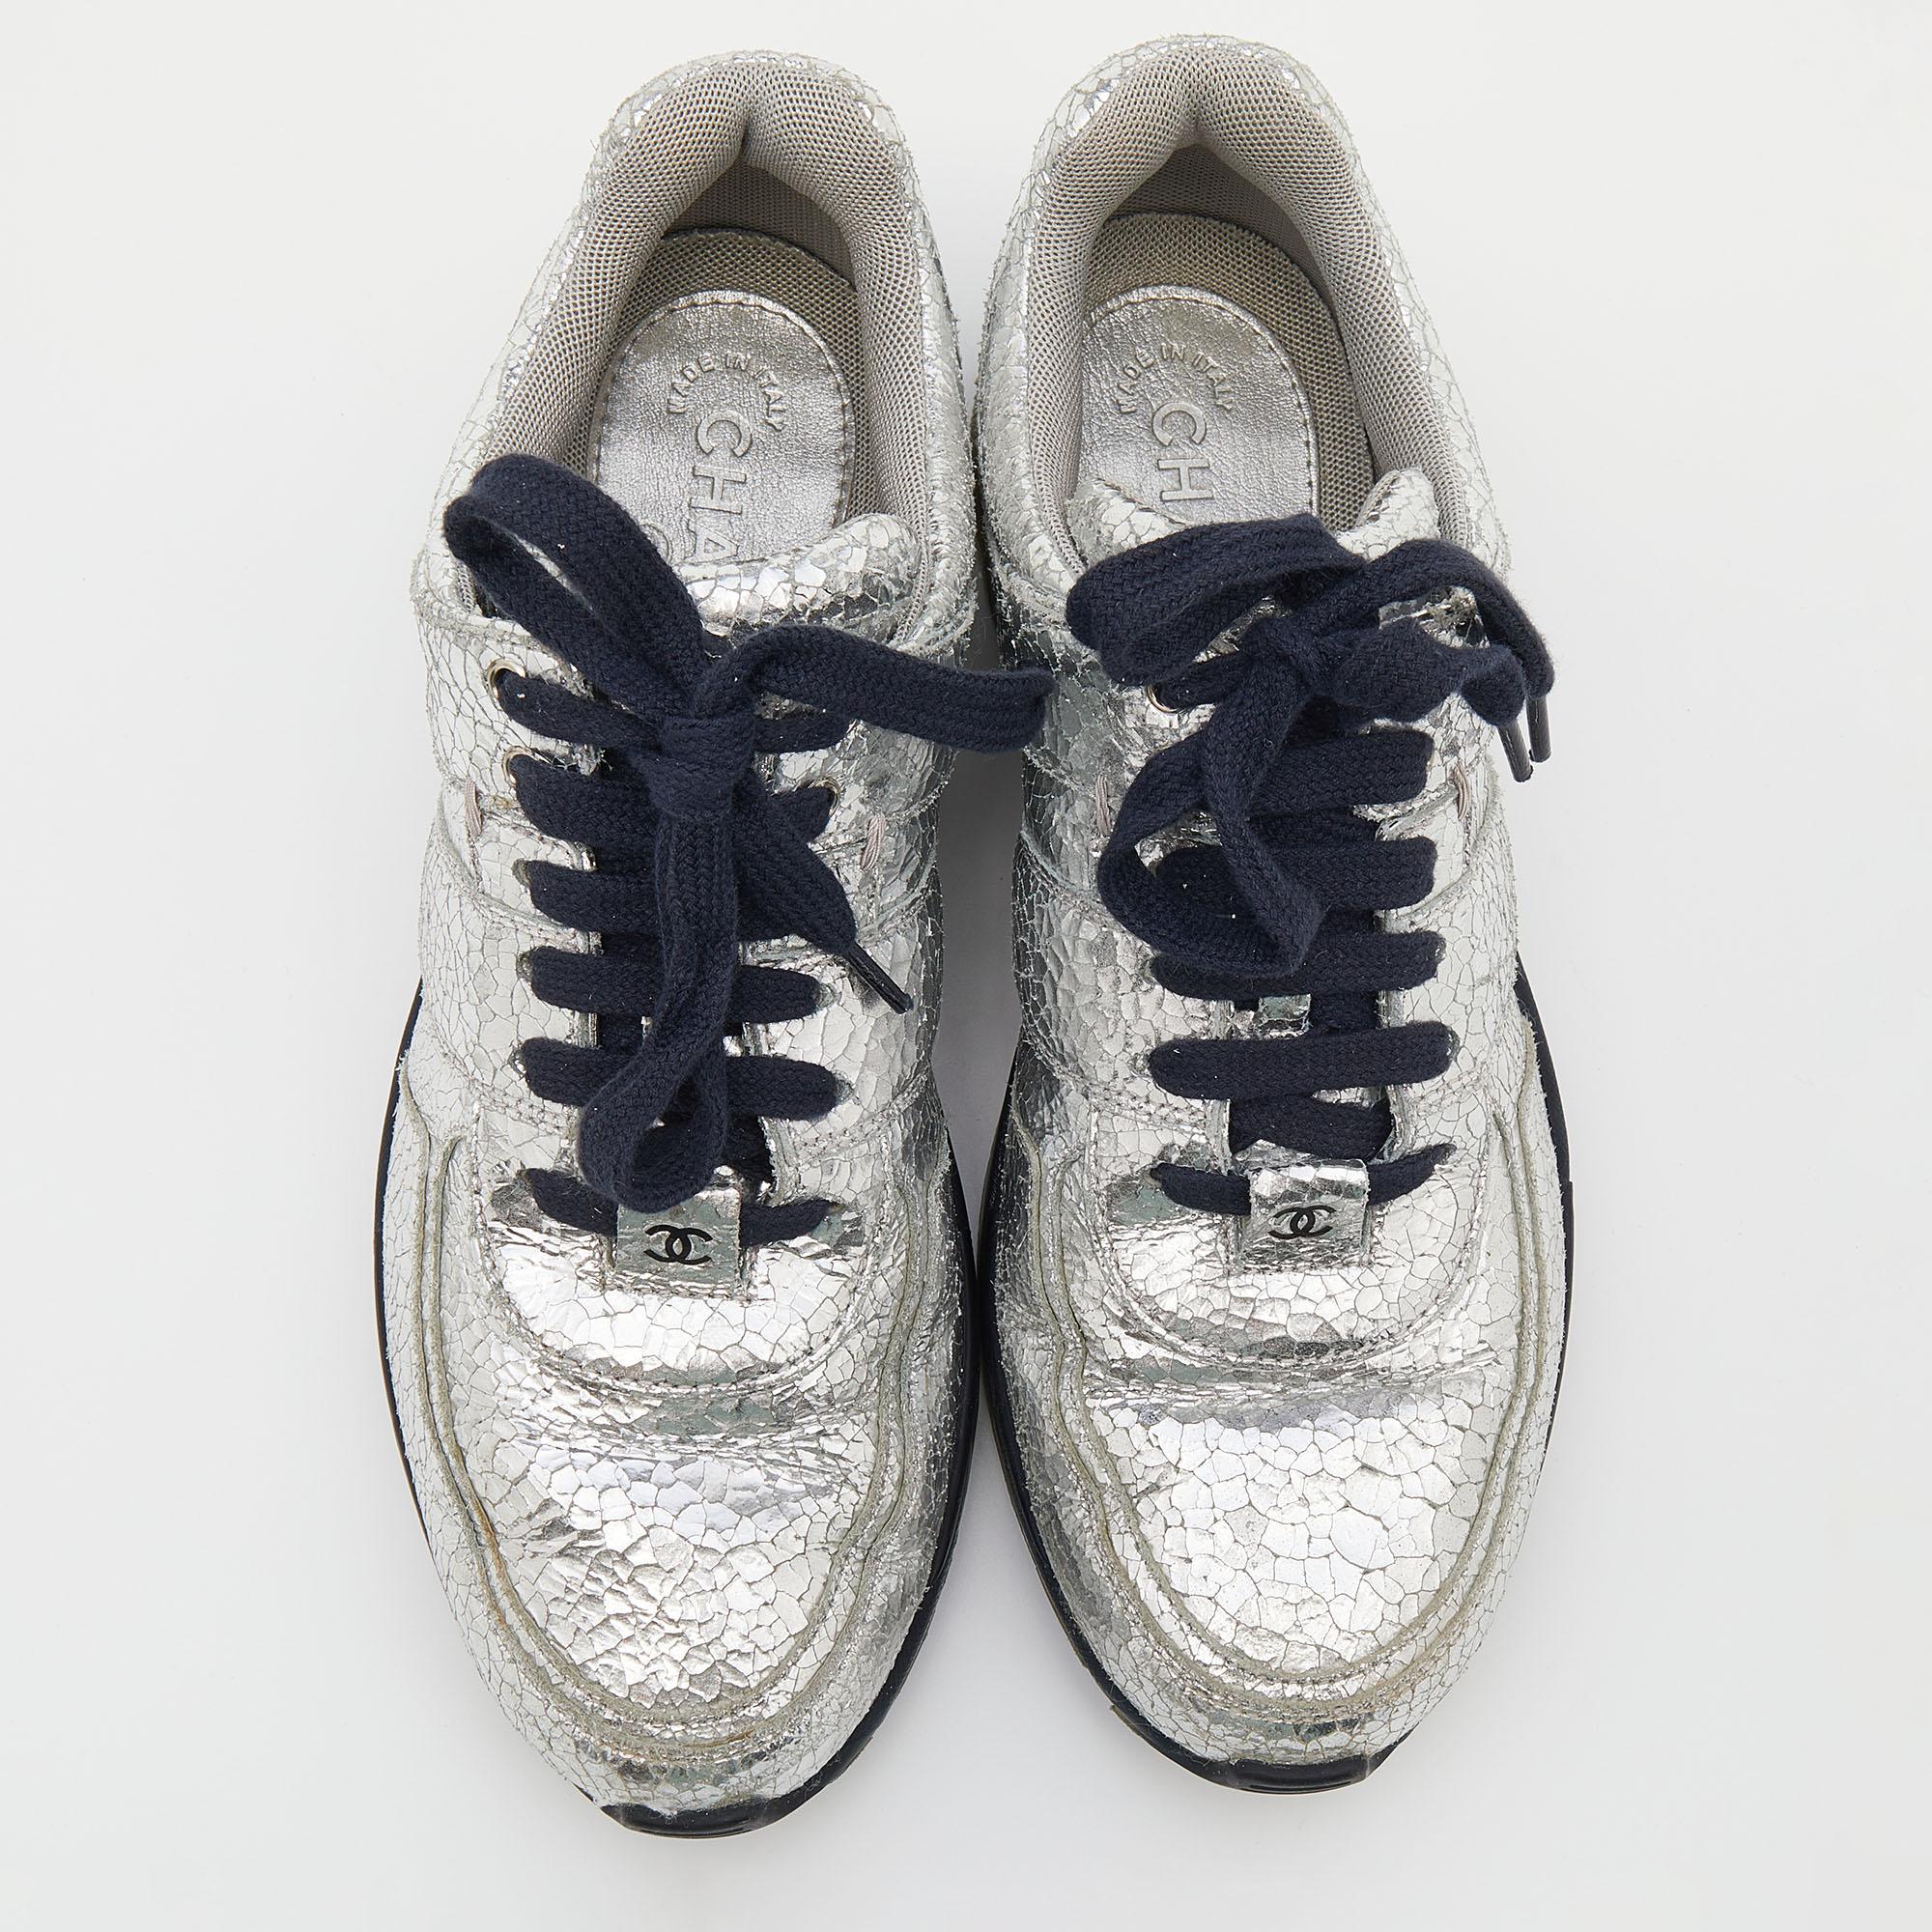 These sneakers from the House of Chanel are here to grant your feet the ultimate comfortable experience. They are crafted from silver crinkled leather into a sturdy low-top profile. They have lace-up fastenings on their vamps. Add these trendy